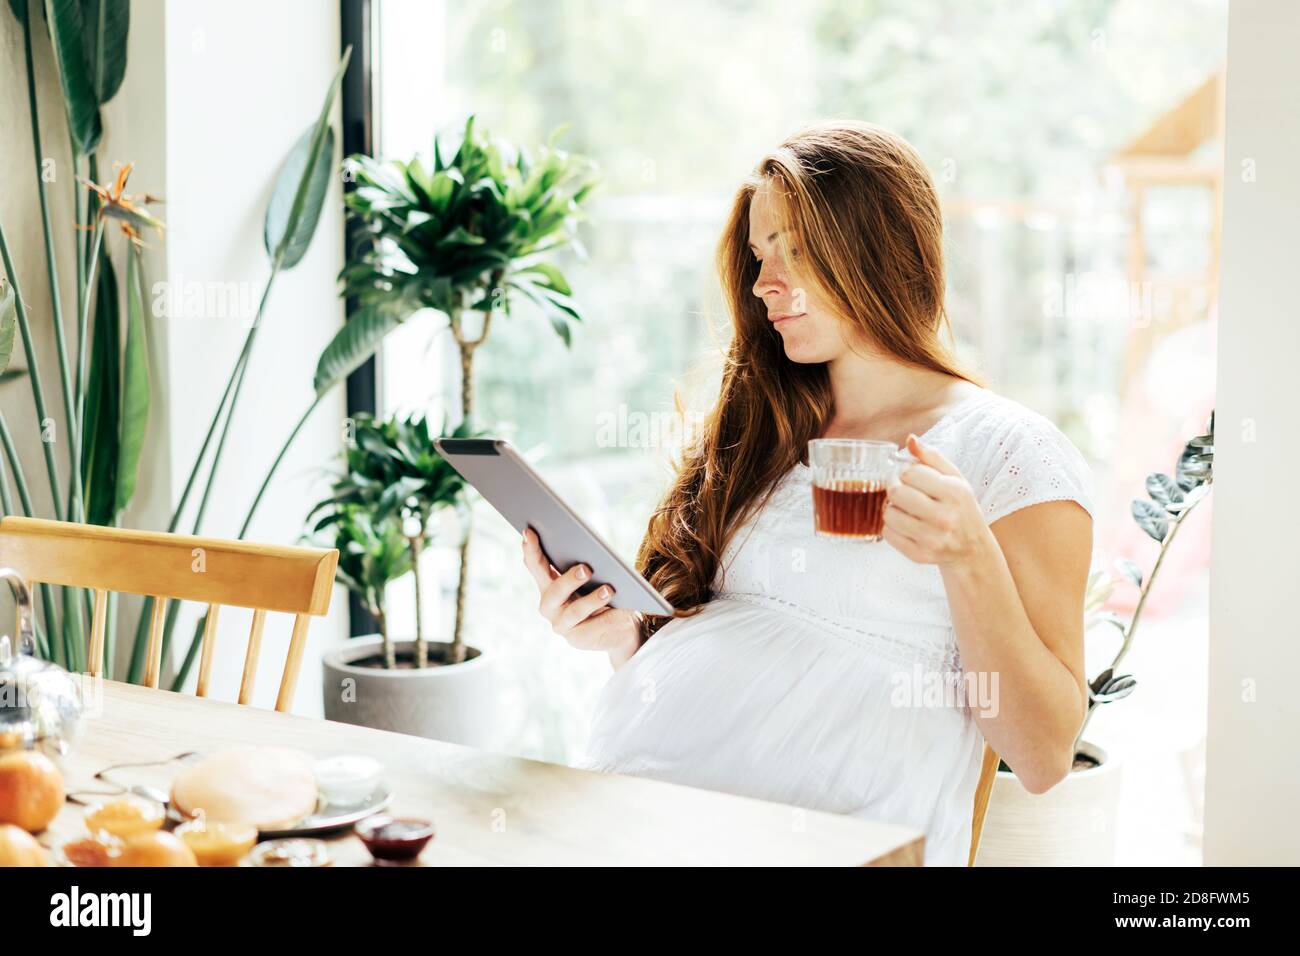 Young modern pregnant woman working on a tablet at breakfast. Stock Photo